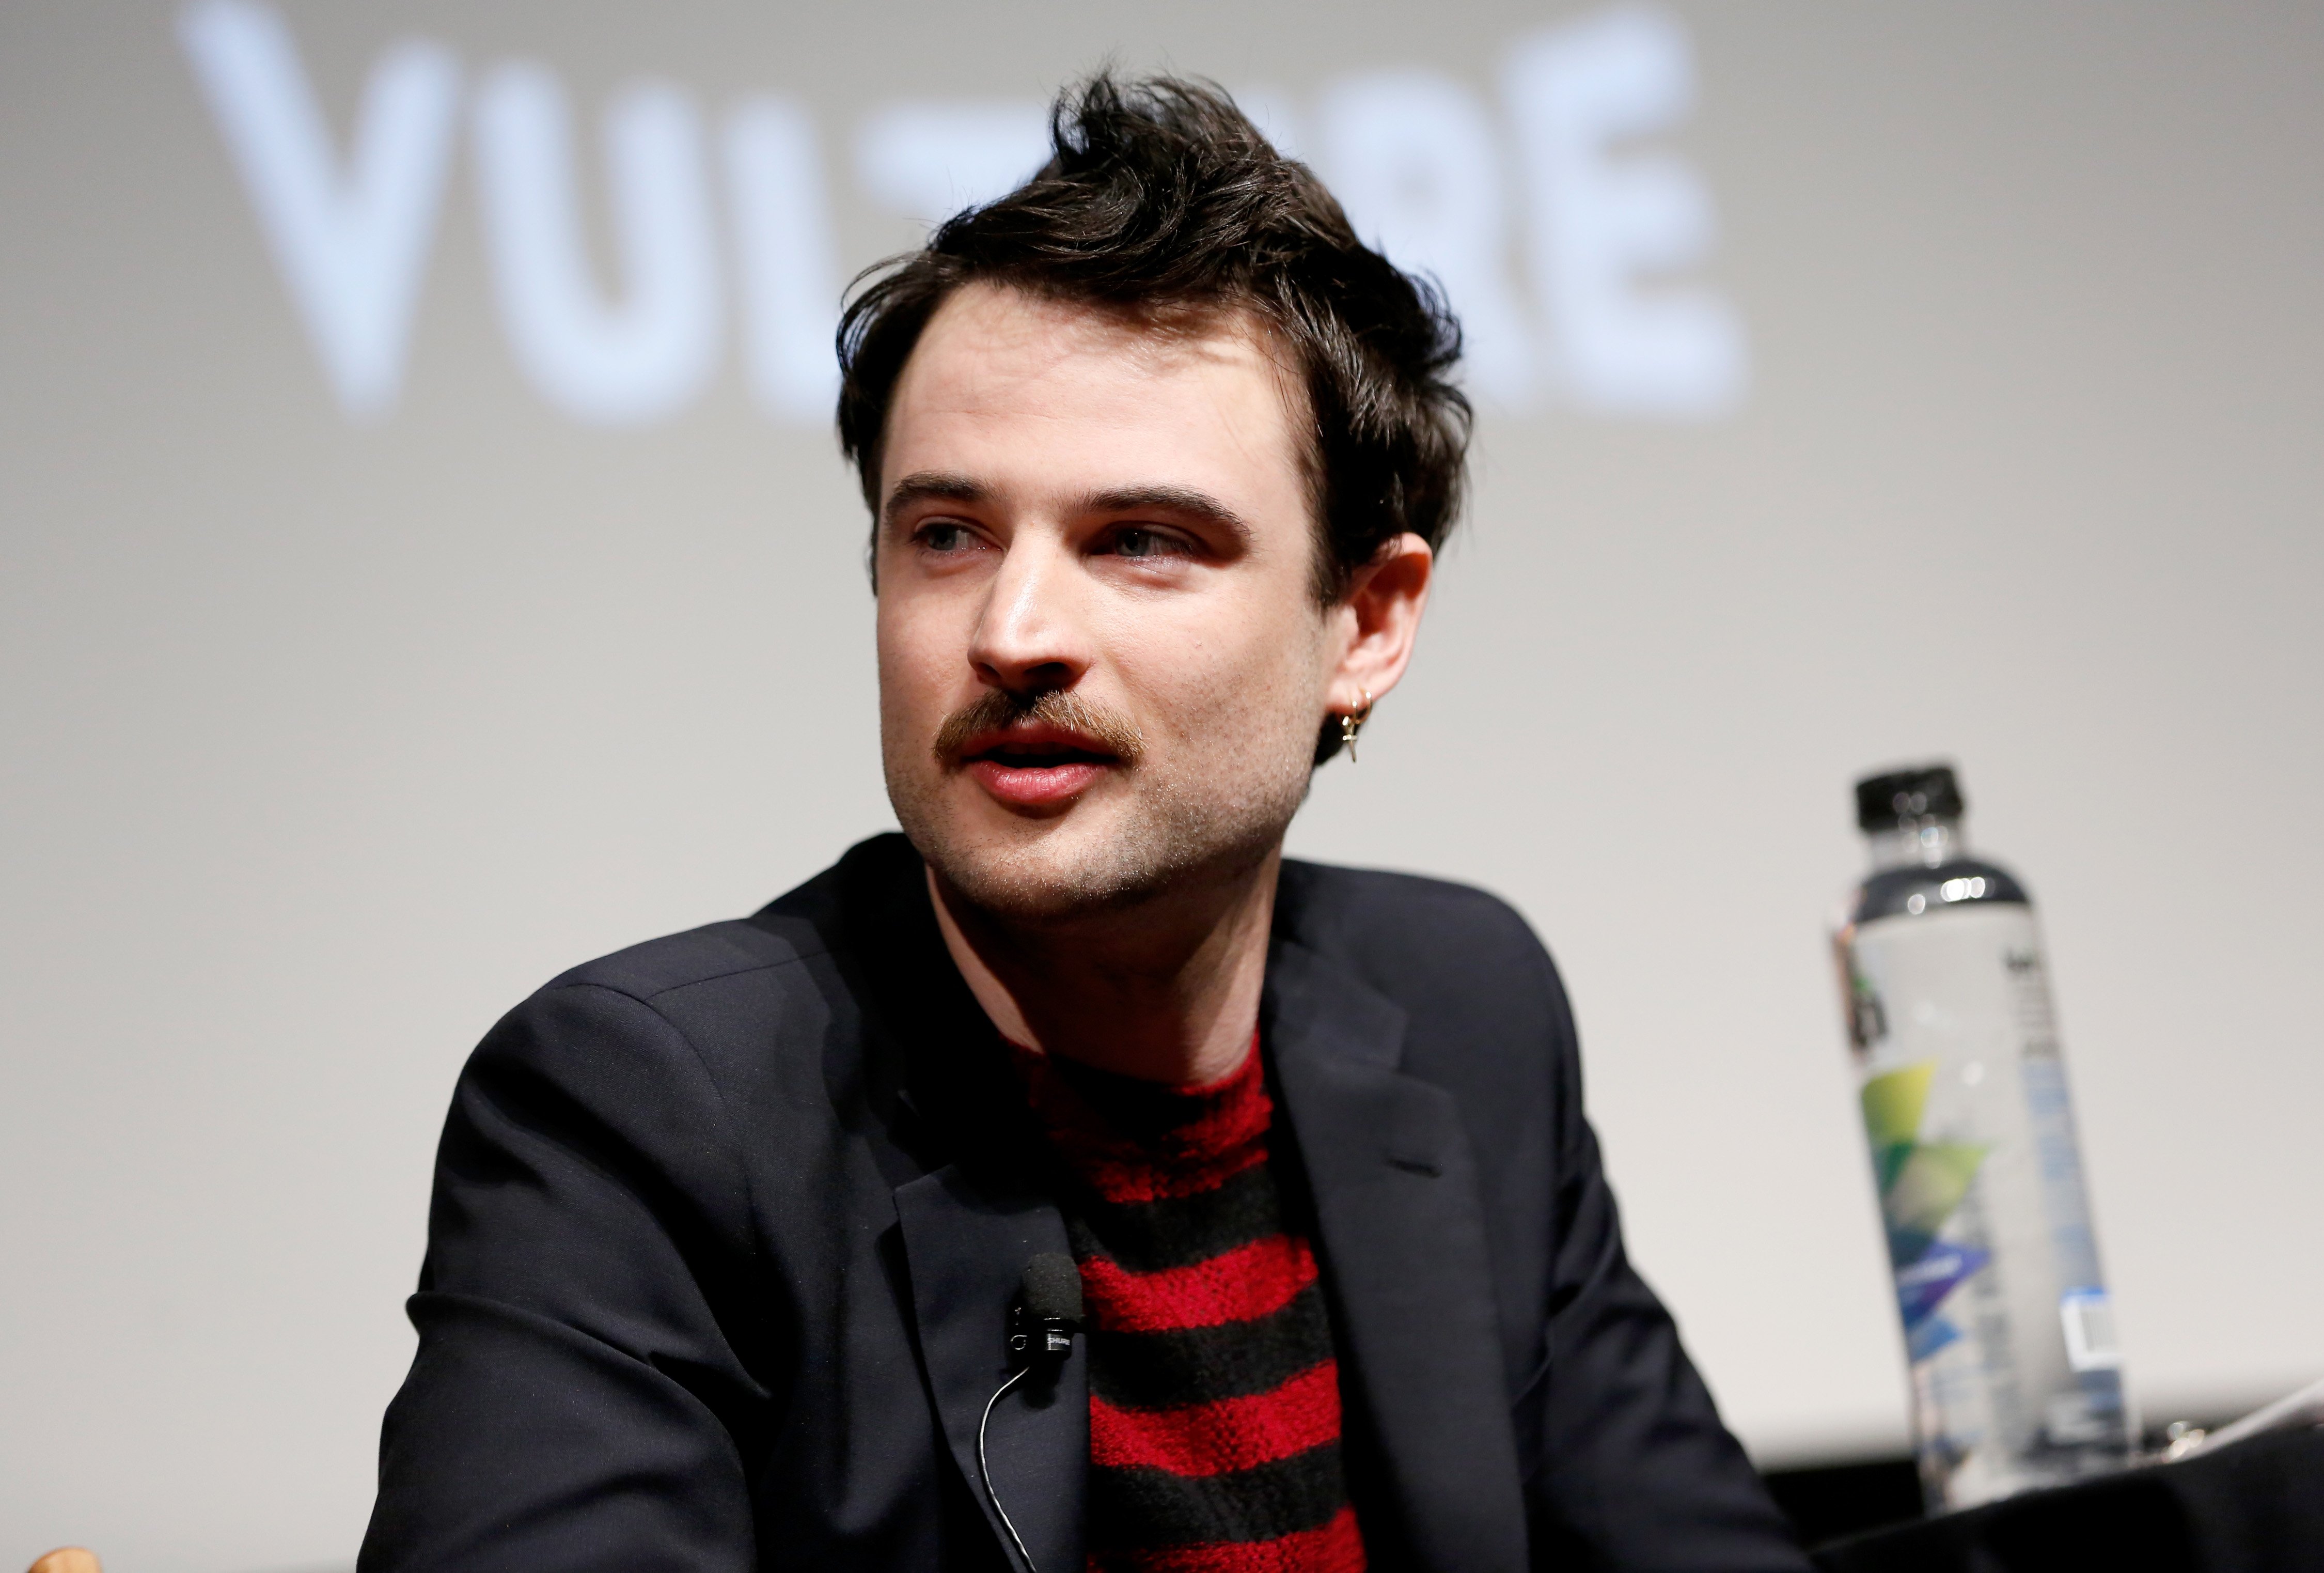 Tom Sturridge attend the world premiere screening of STARZ's film "Sweetbitter" on April 26, 2018, in New York City. | Source: Getty Images